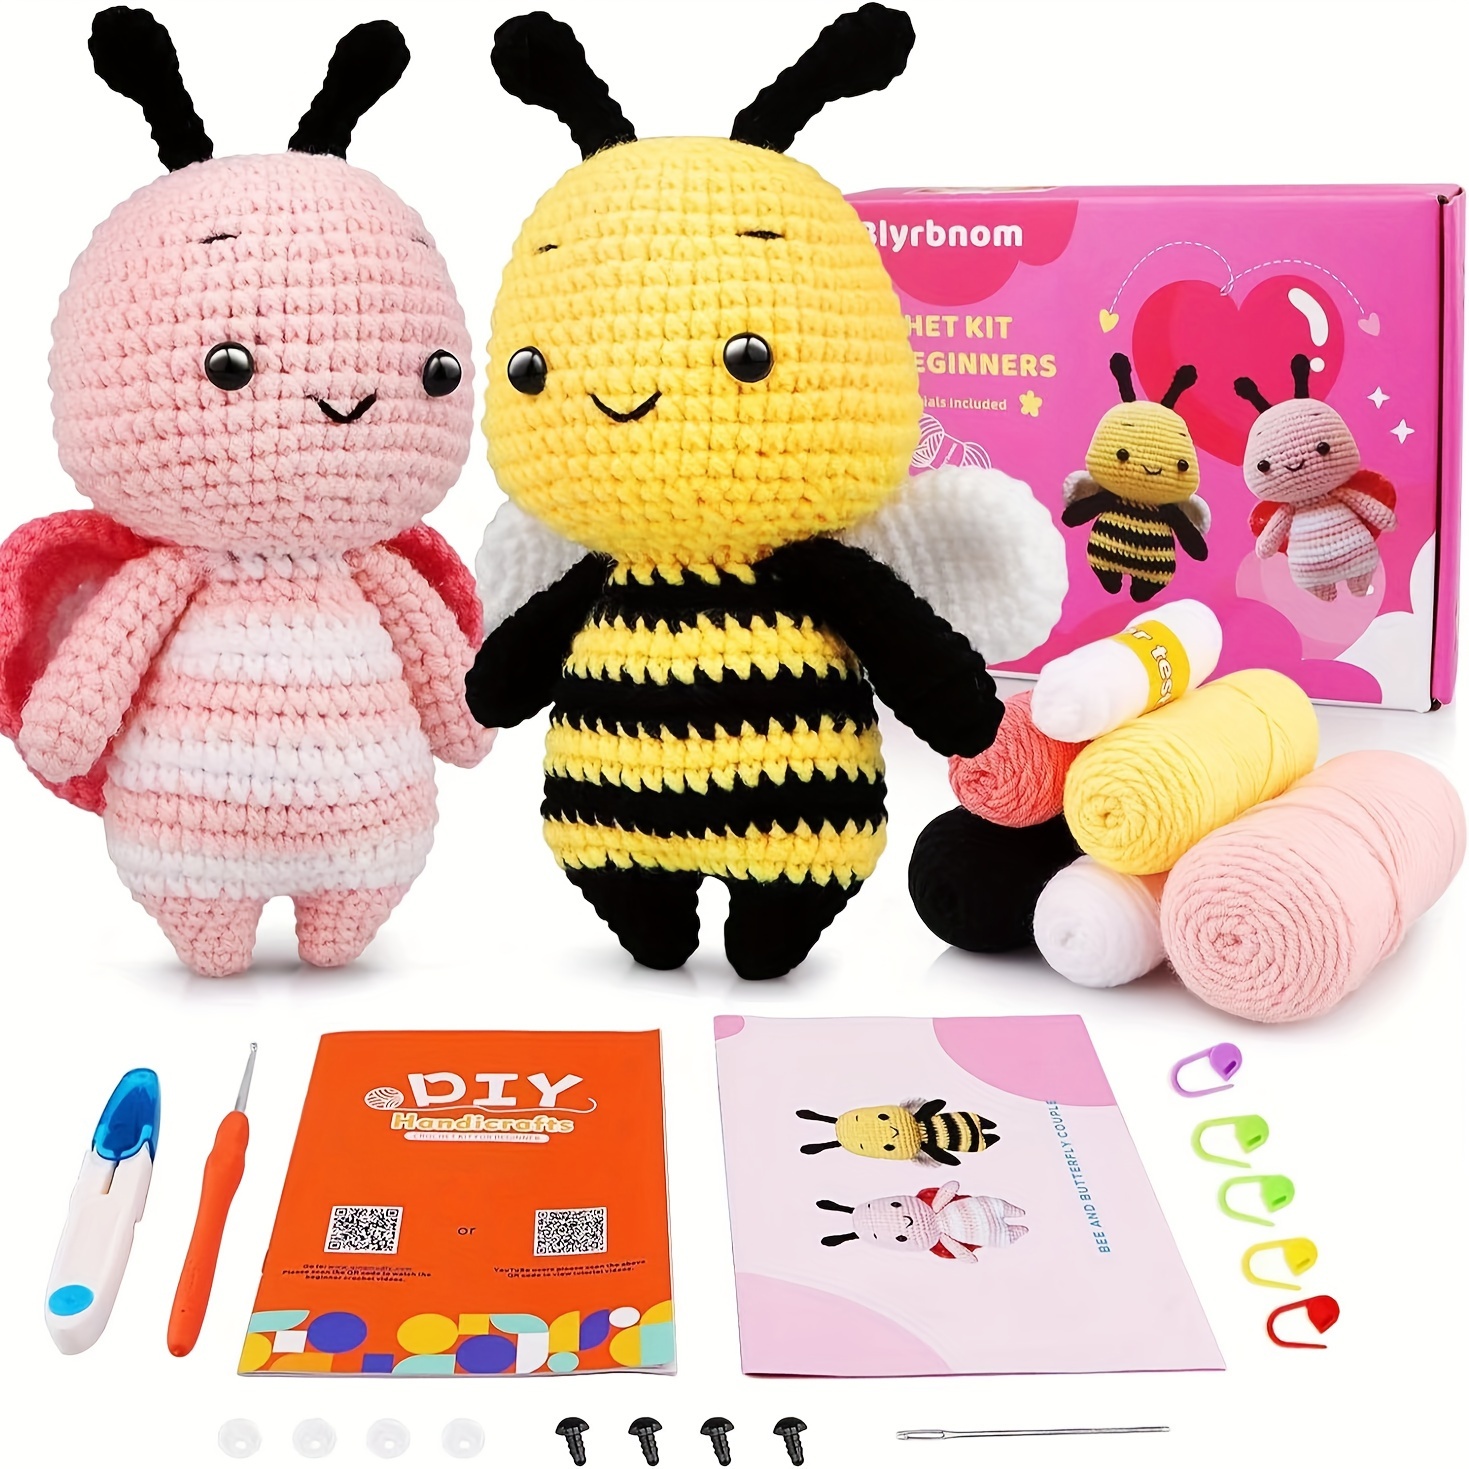 

Crochet Amigurumi Kit For Beginners - Pure Cotton Diy Craft Set For Making Bee & Butterfly Couple Dolls, Includes Yarn, Tools, And Instructions, Ideal For Teens & Adults 14+